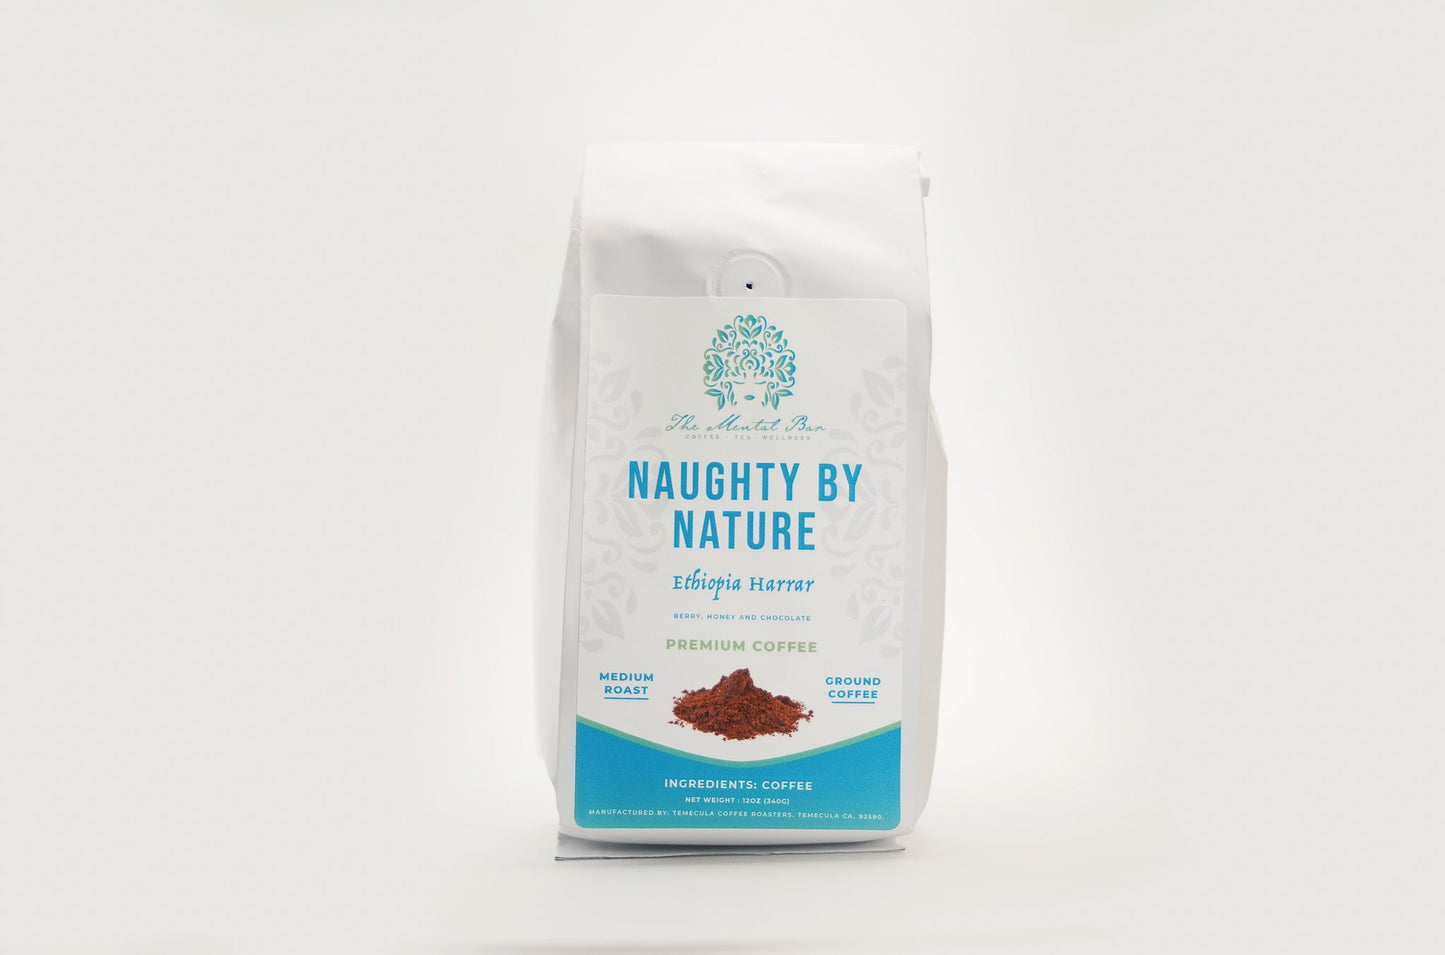 Naughty by Nature For Wholesaler (Ethiopia Harrar)